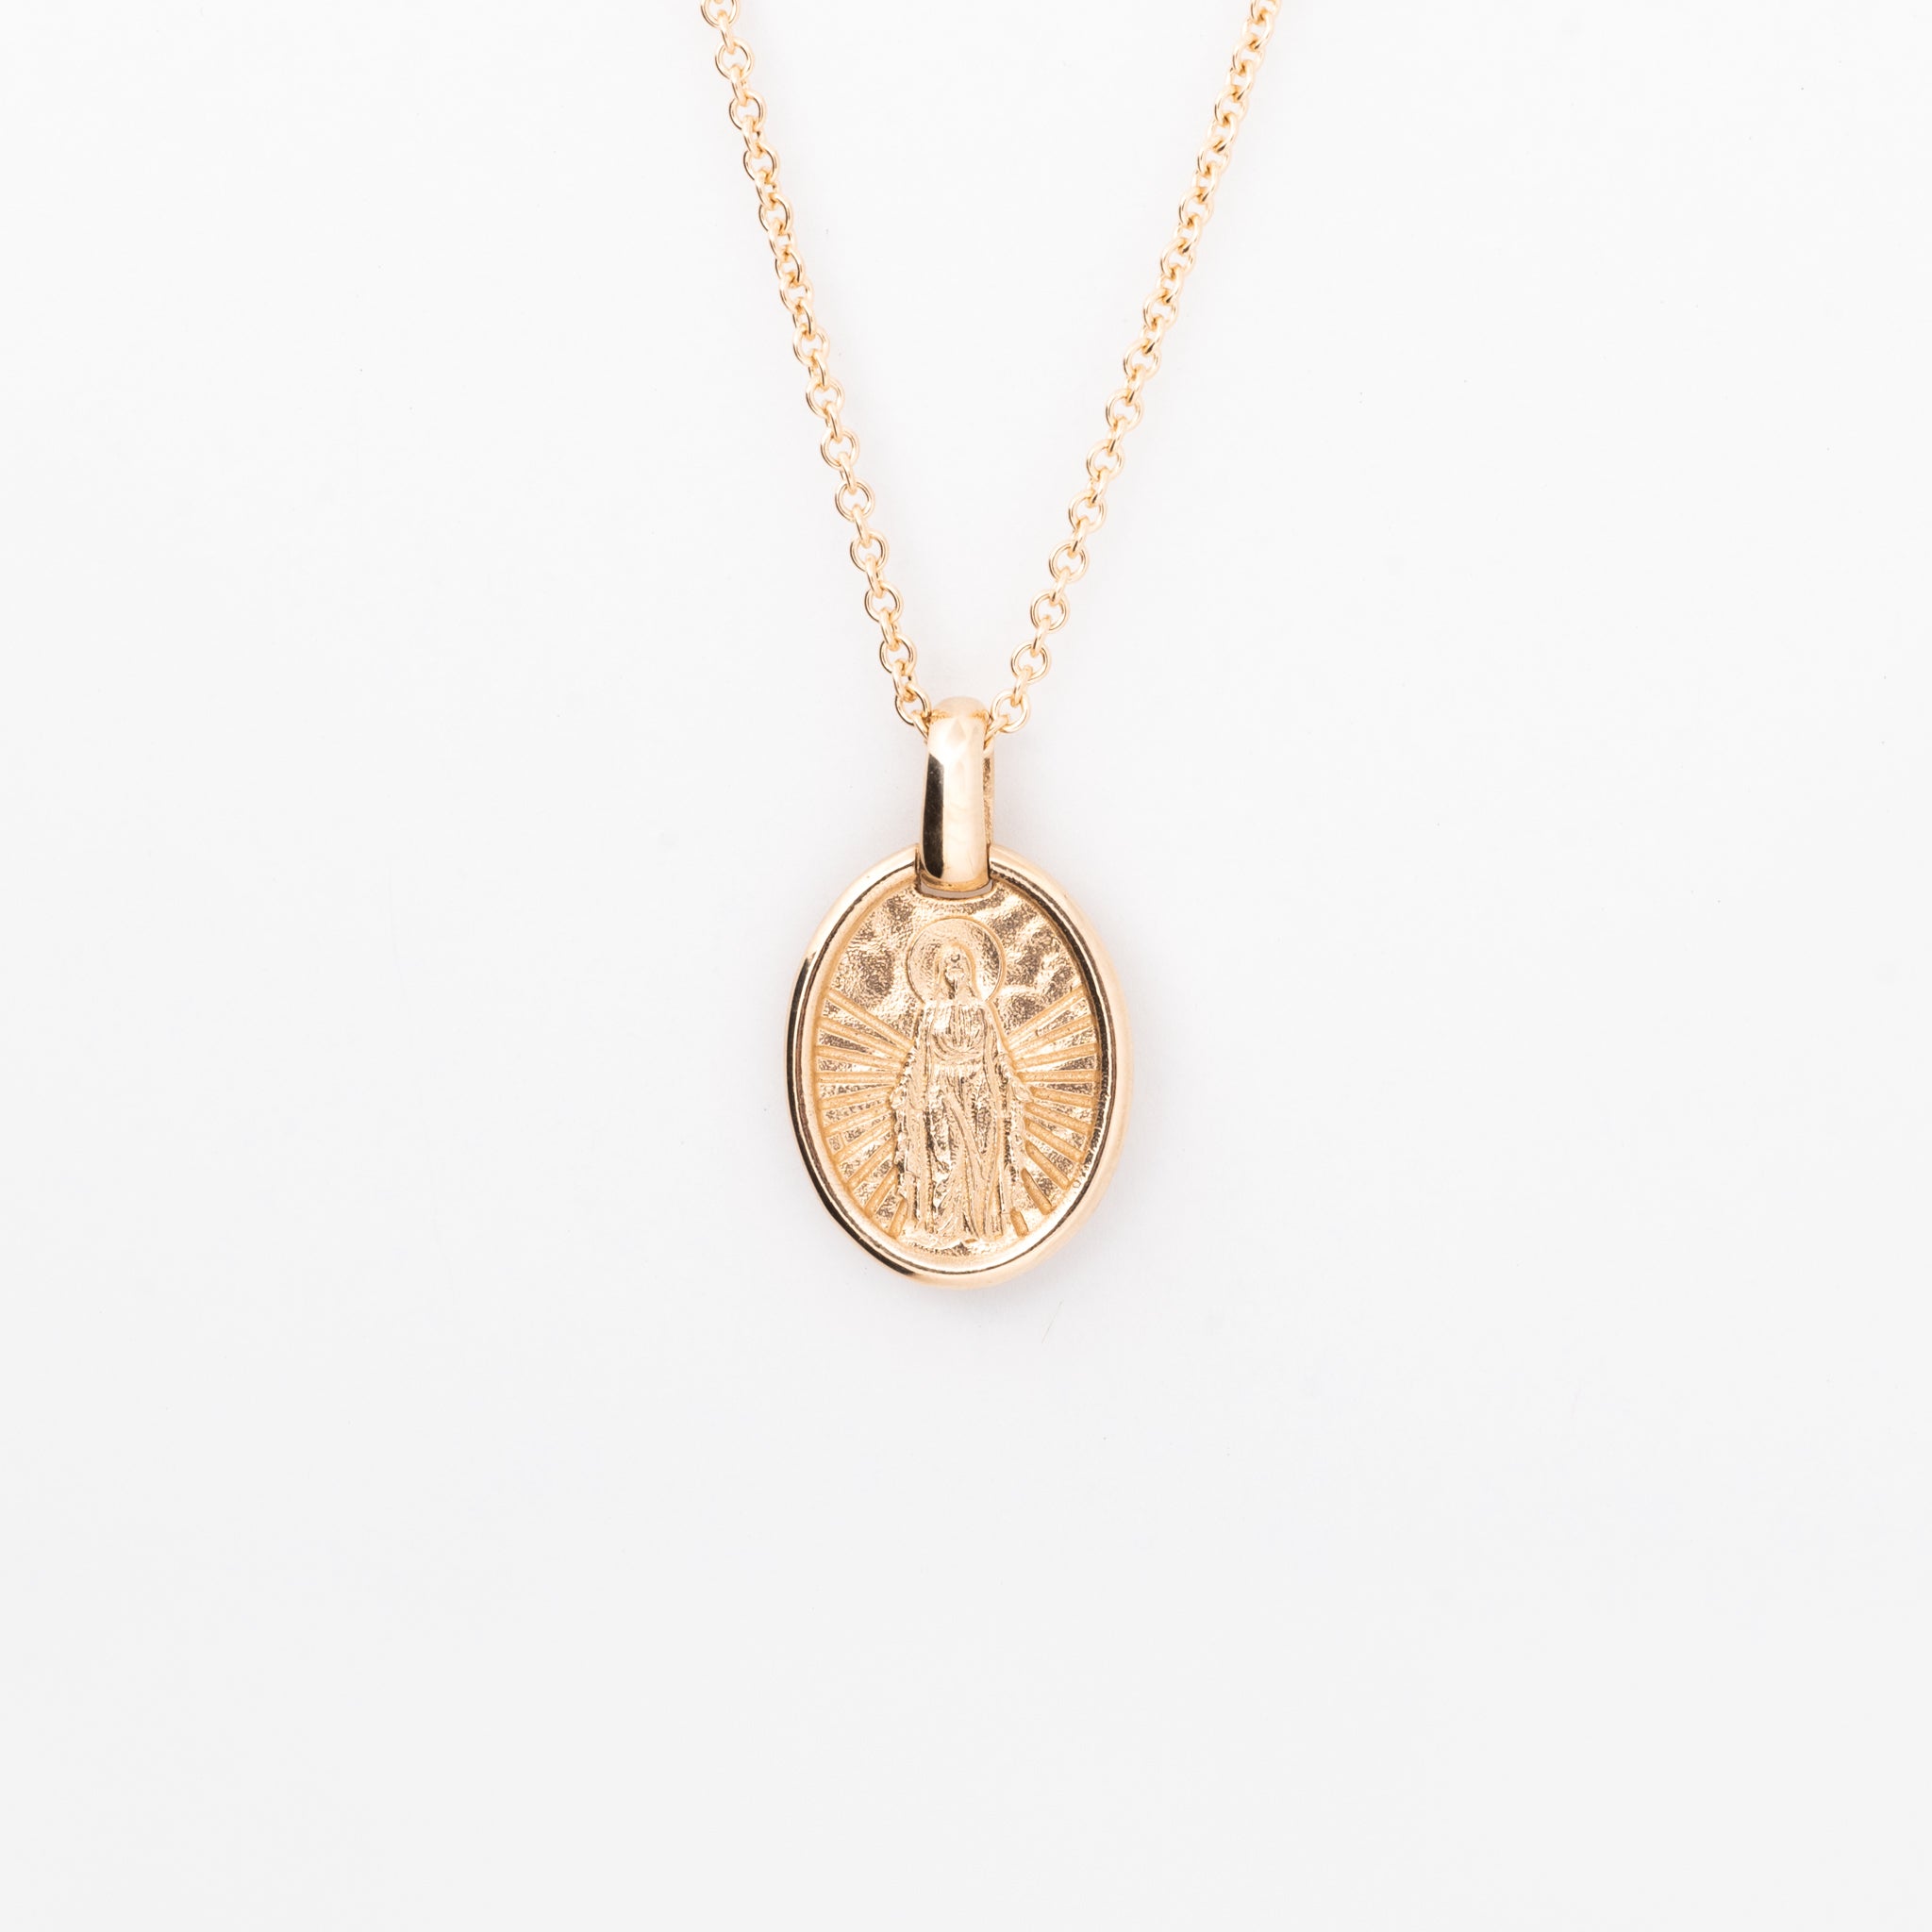 Necklaces – Yearly Company